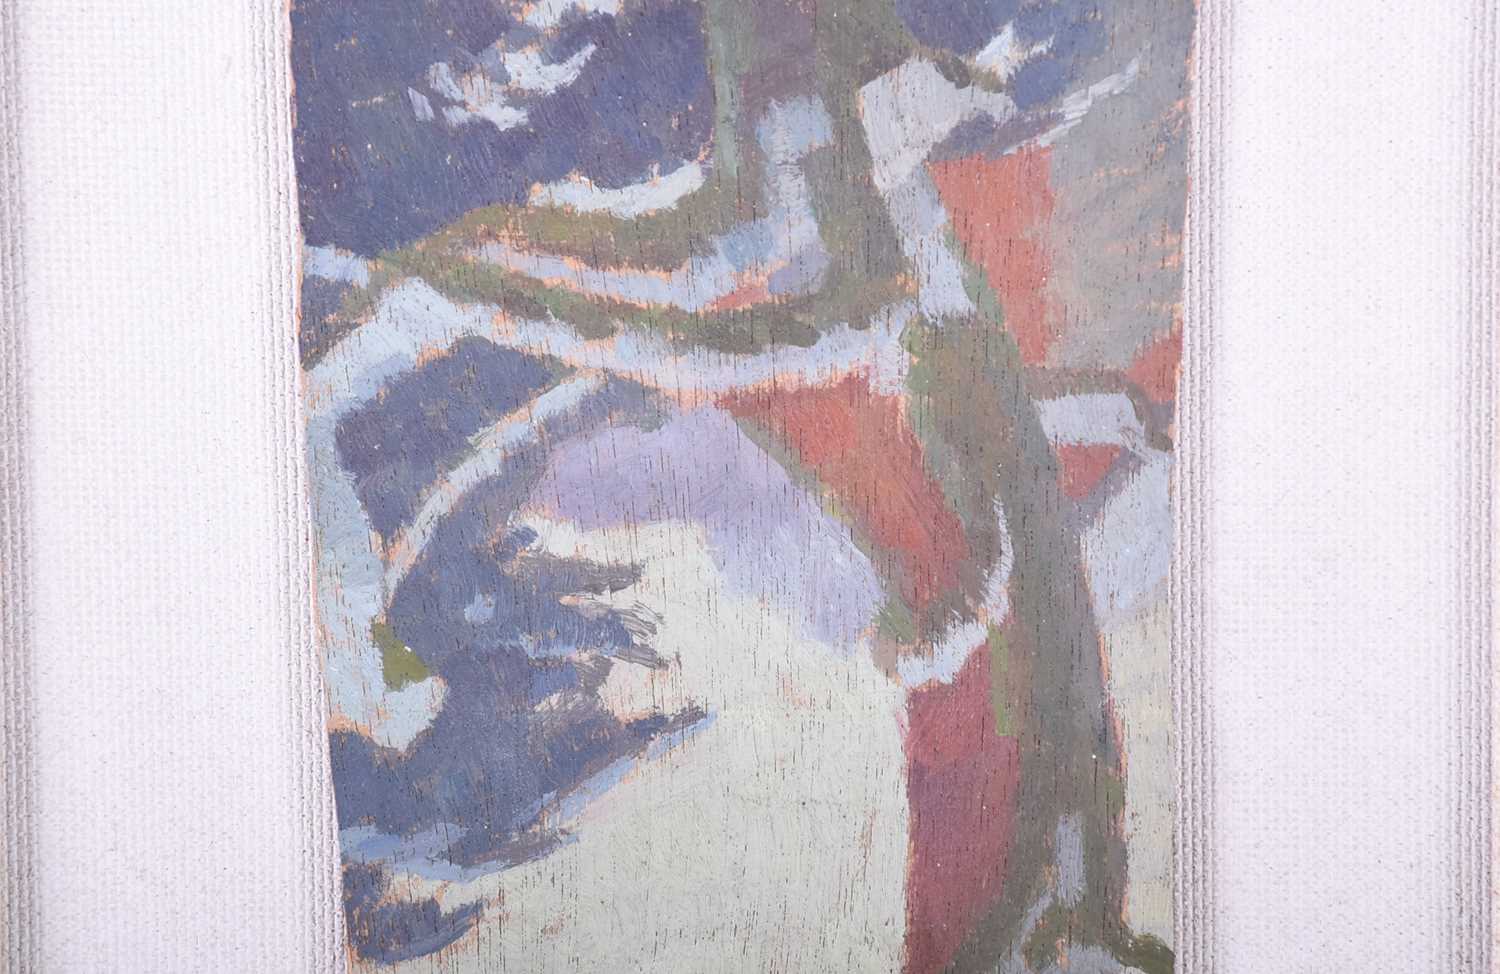 Modern British School, c.1940, Roof Study and Snowy Tree Study, a pair, oils on panel, 13 x 11.5cm & - Image 2 of 5